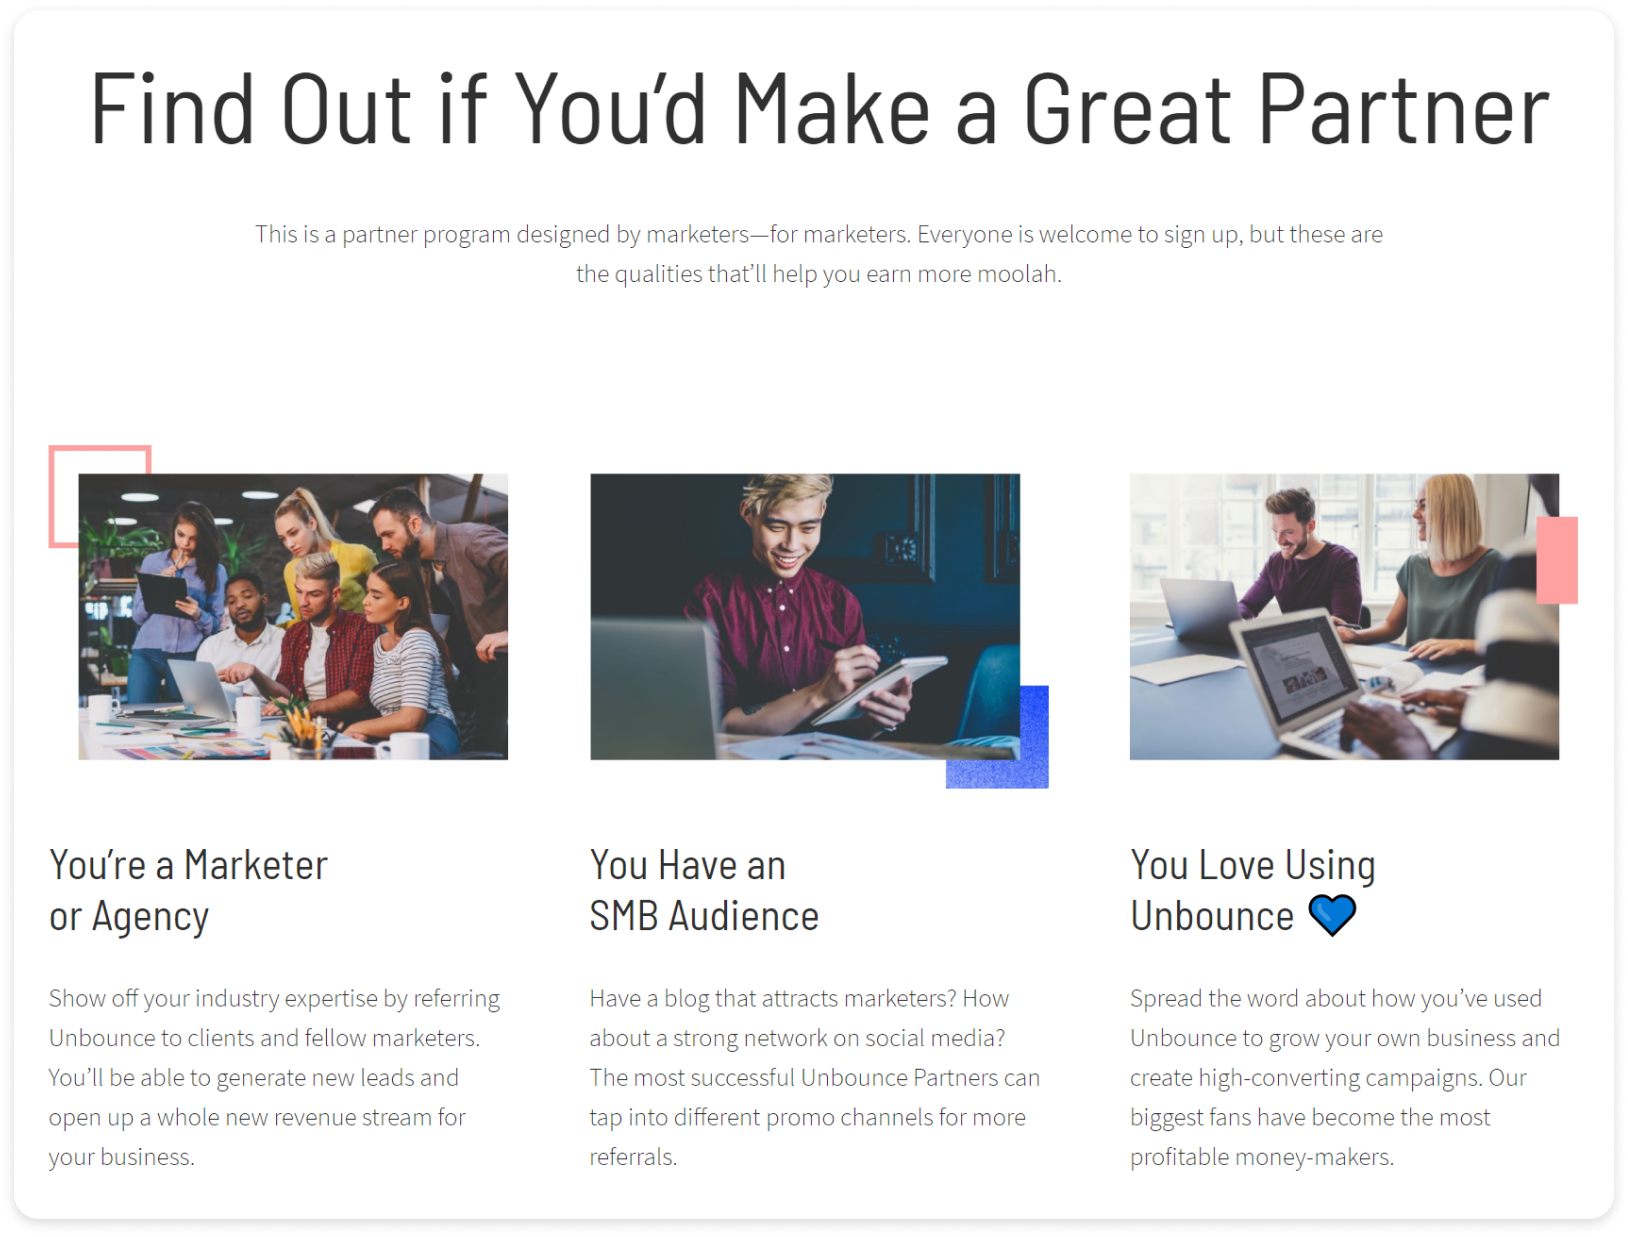 Screenshot of Unbounce's partner program webpage on why you should become a partner